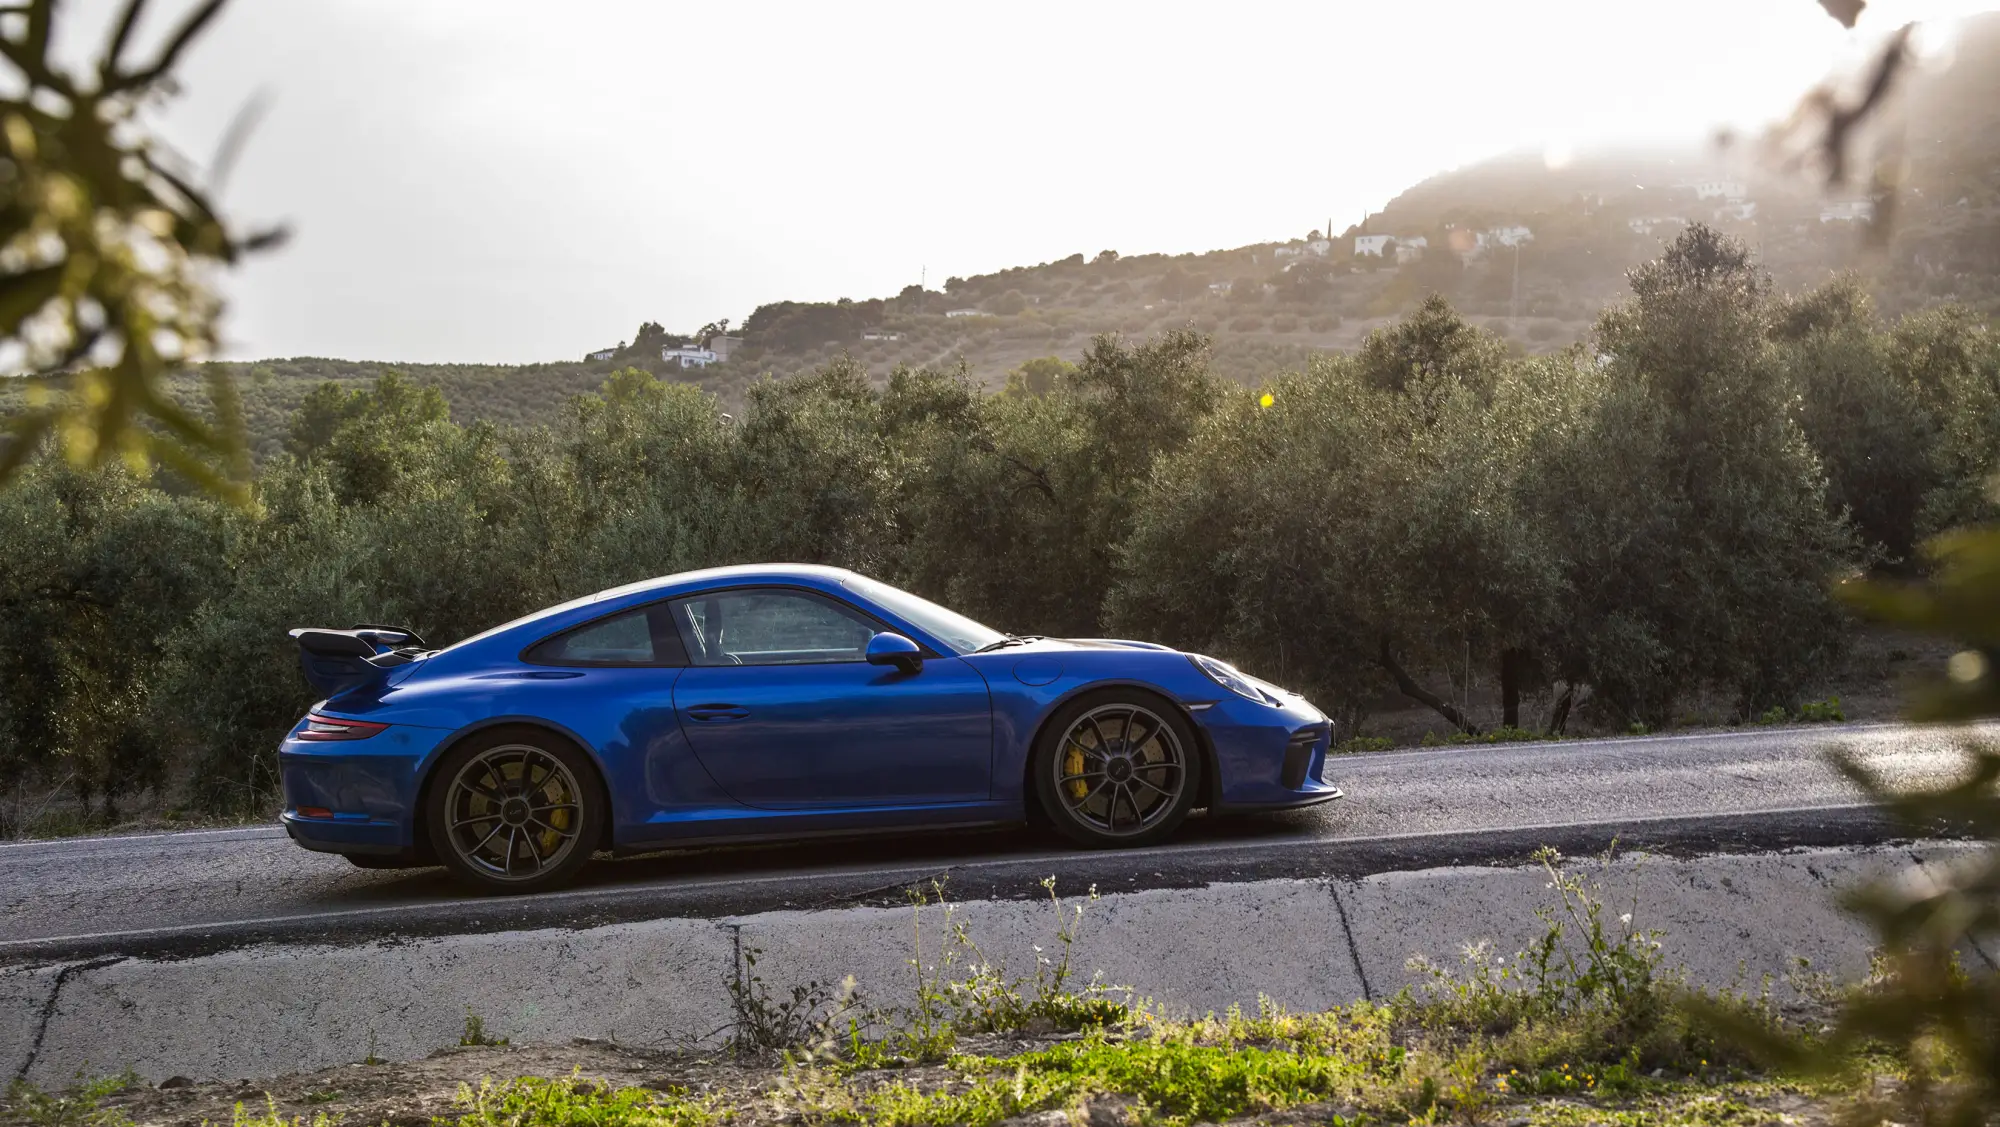 Porsche 911 GT3 MY 2018 - Andalusia - 9